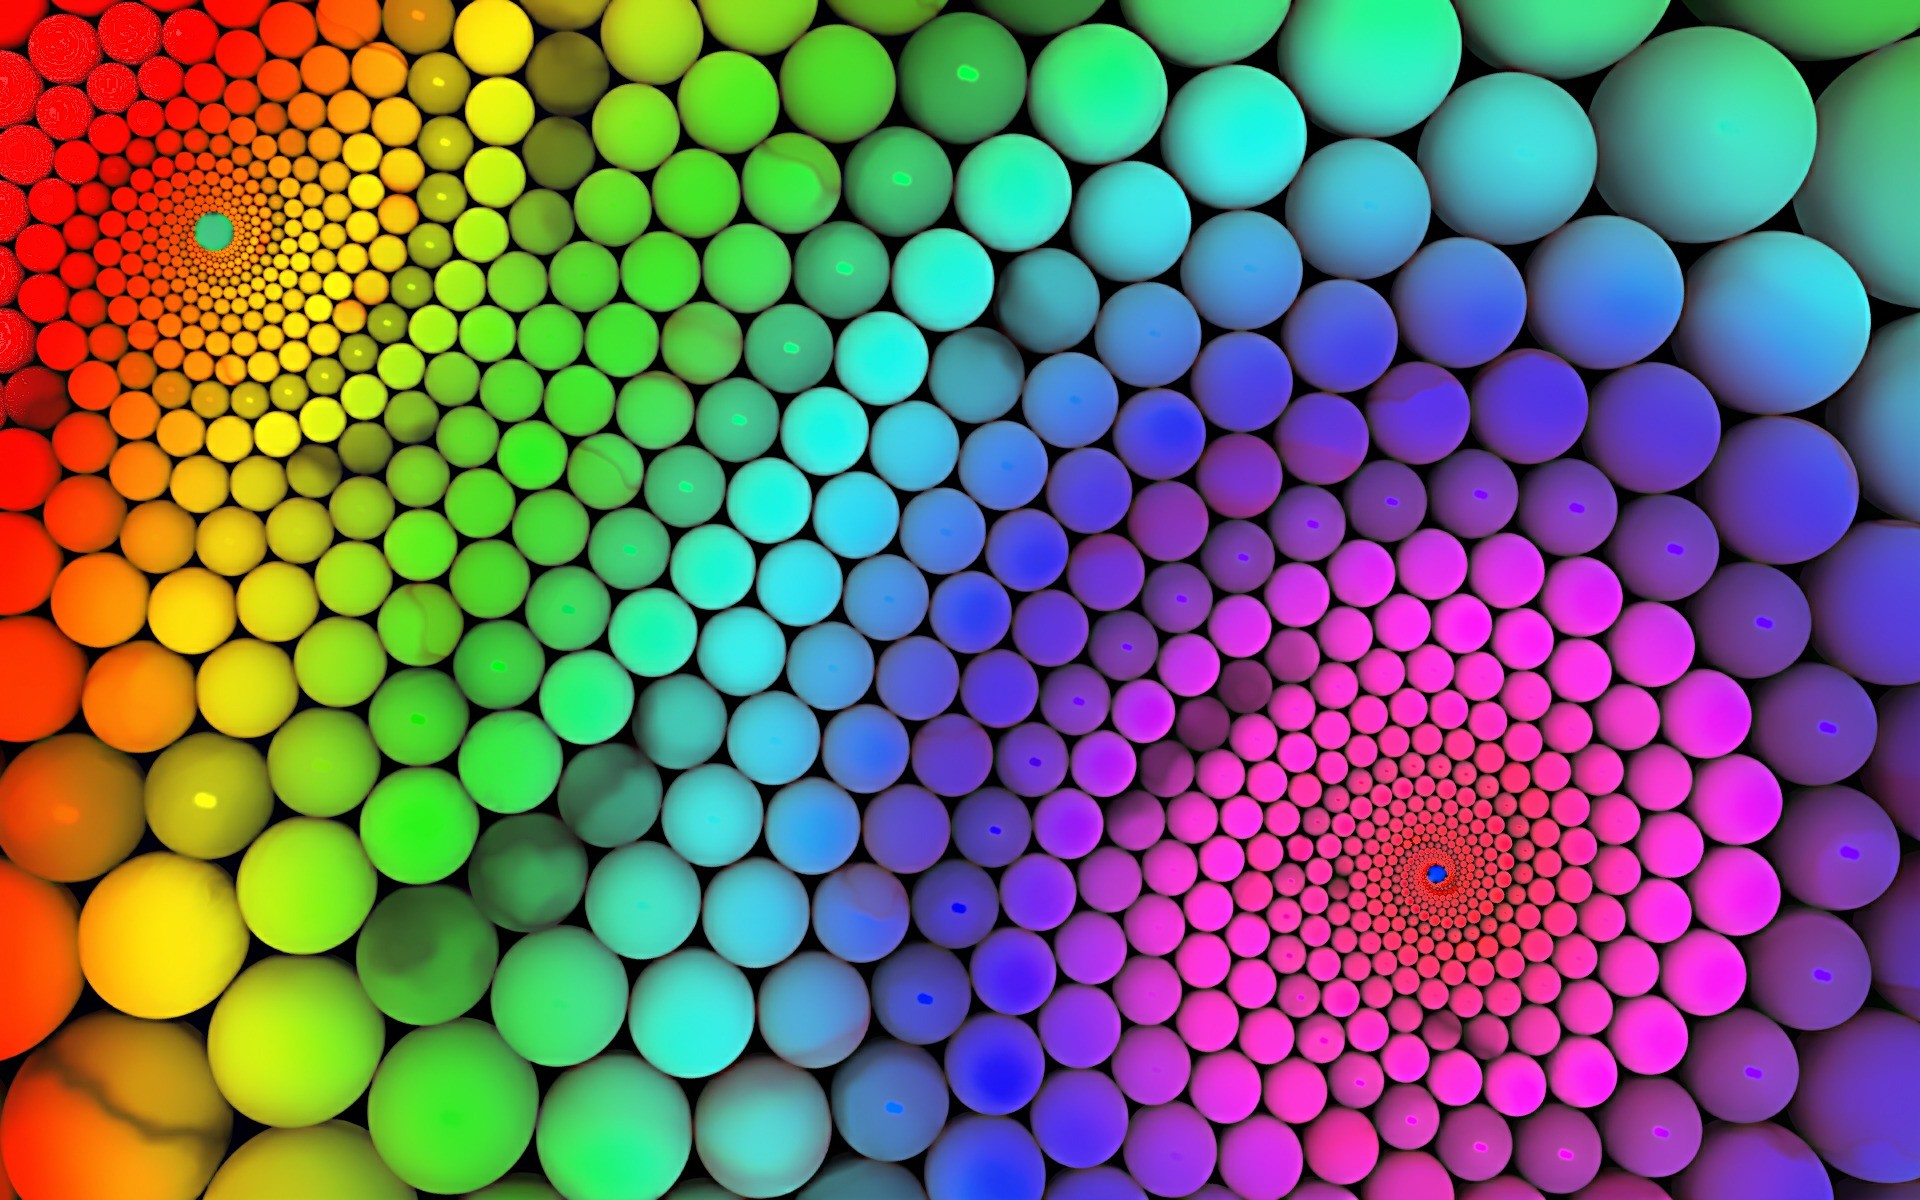 Cool Colorful 3D Rainbow Wallpaper HD 4 High Resolution Wallpaper Full Size